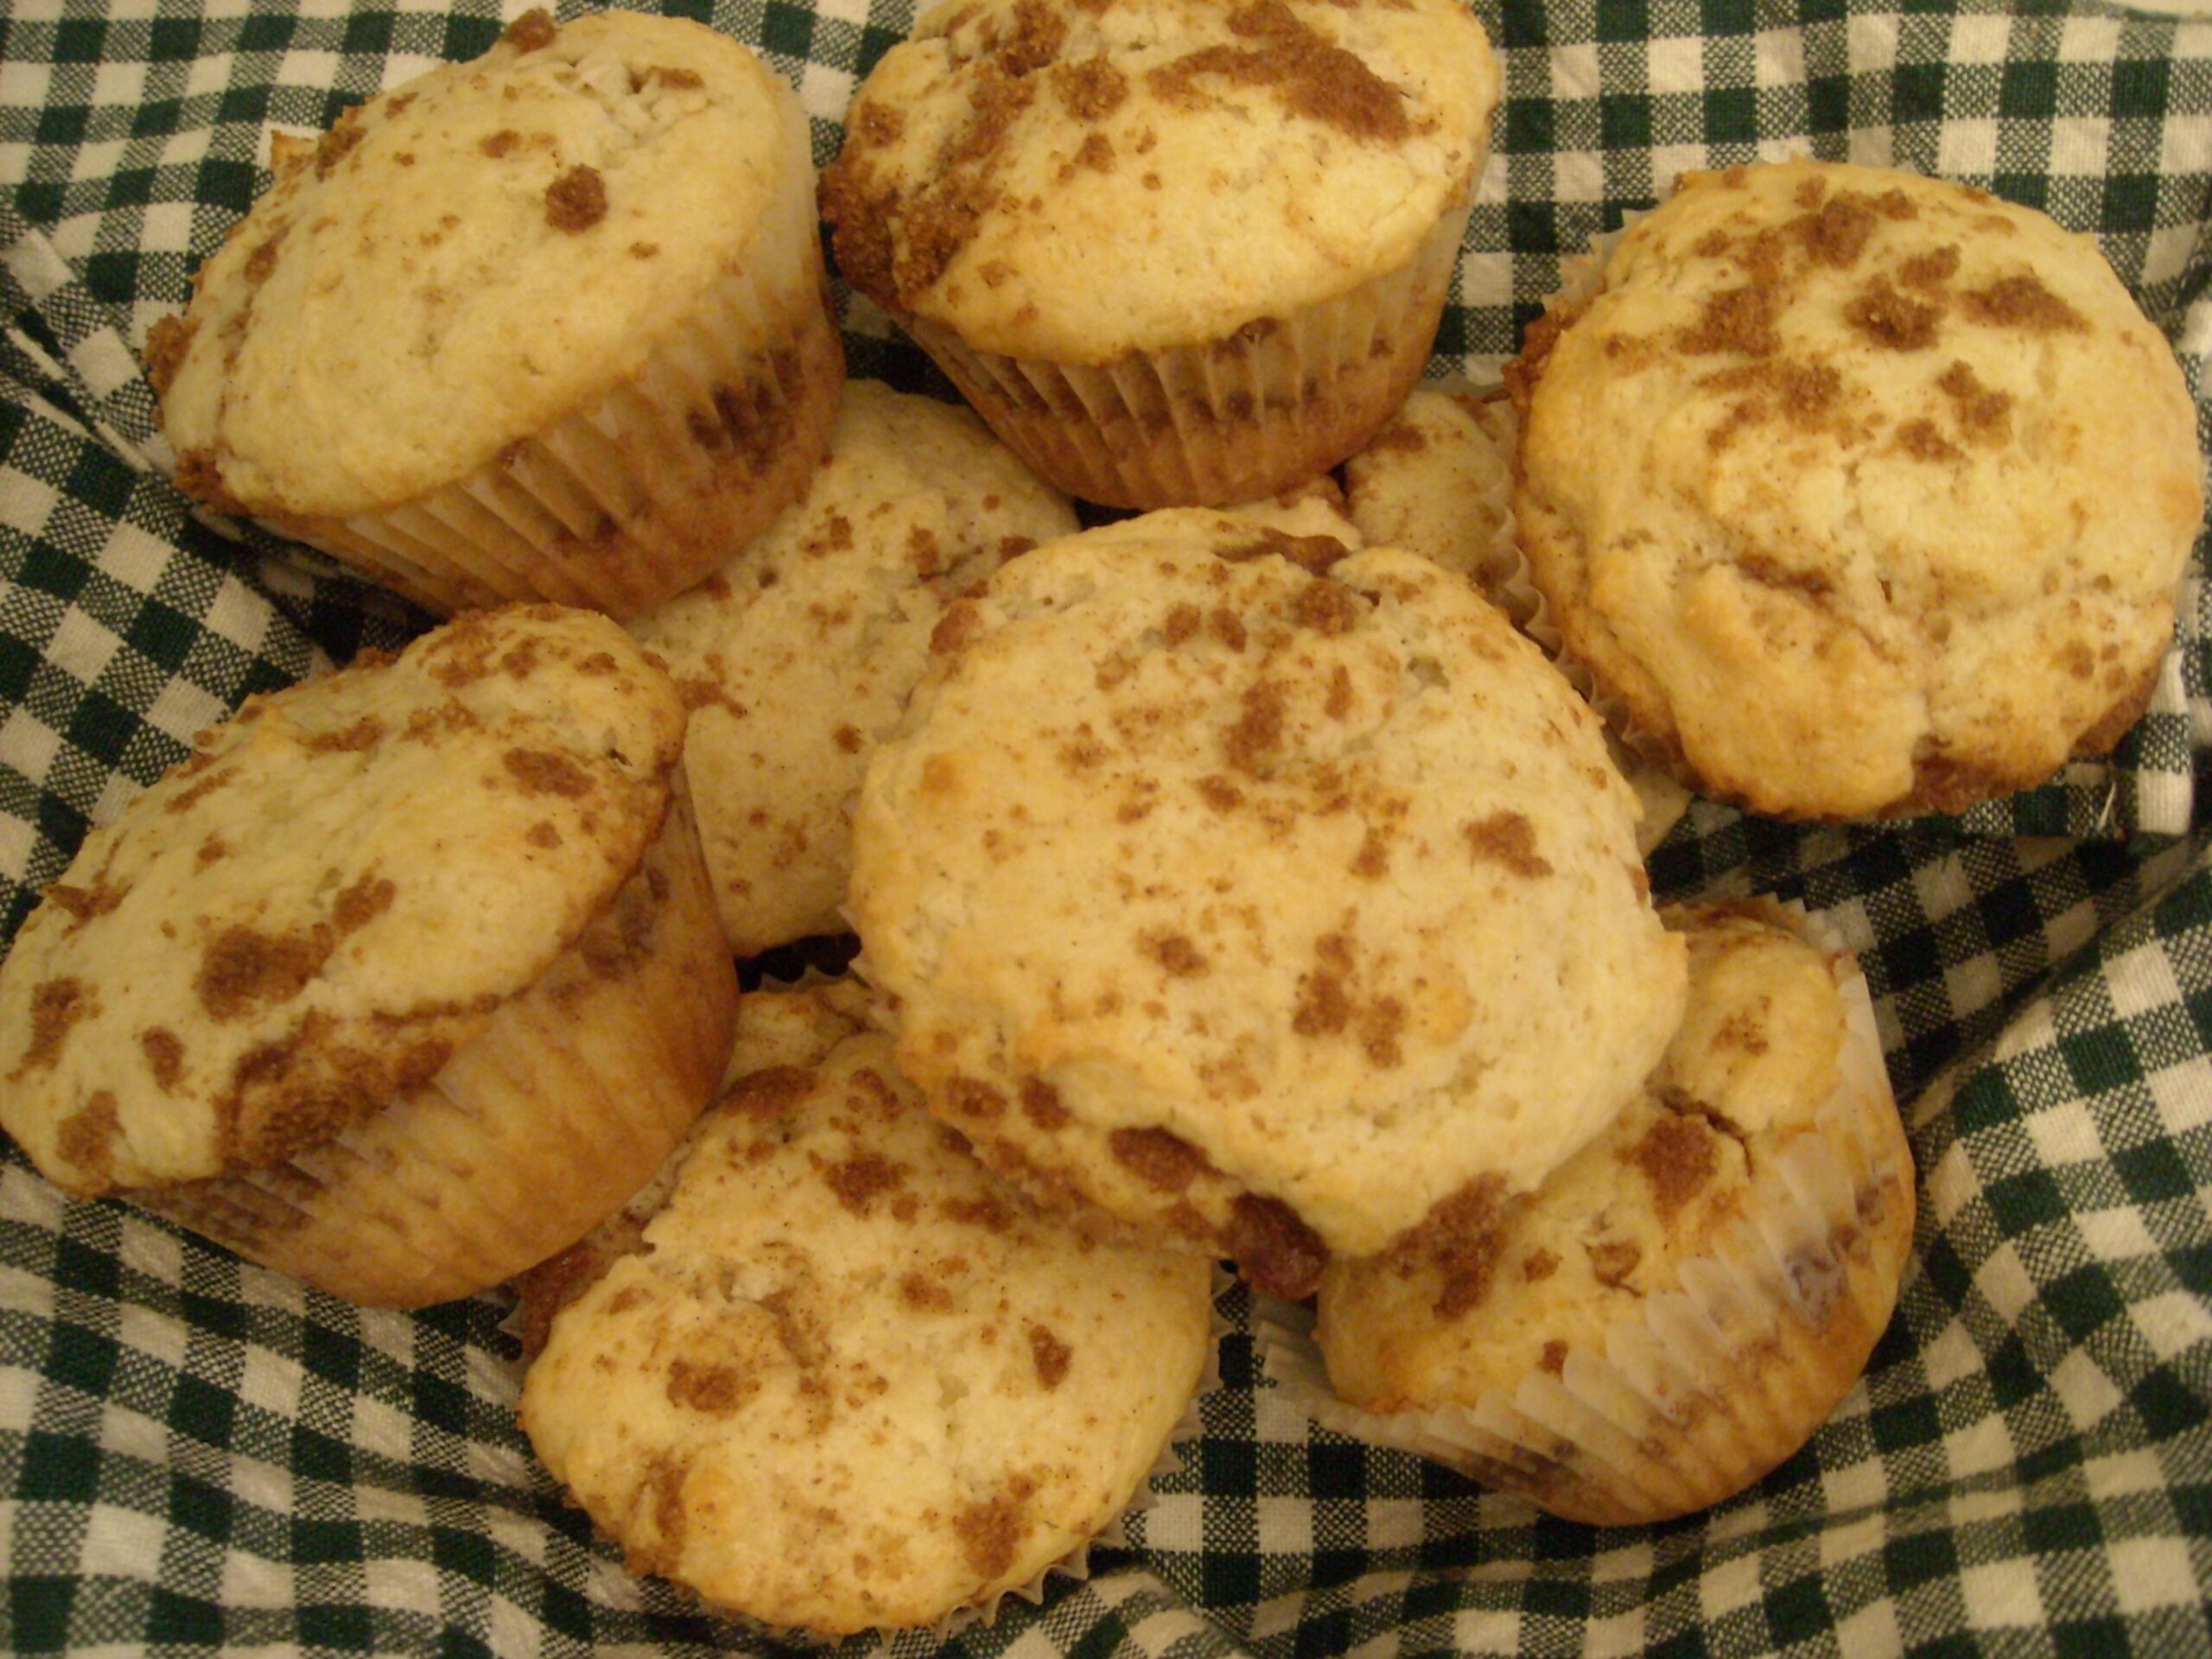  Take a coffee break and indulge in these flavorful muffins.